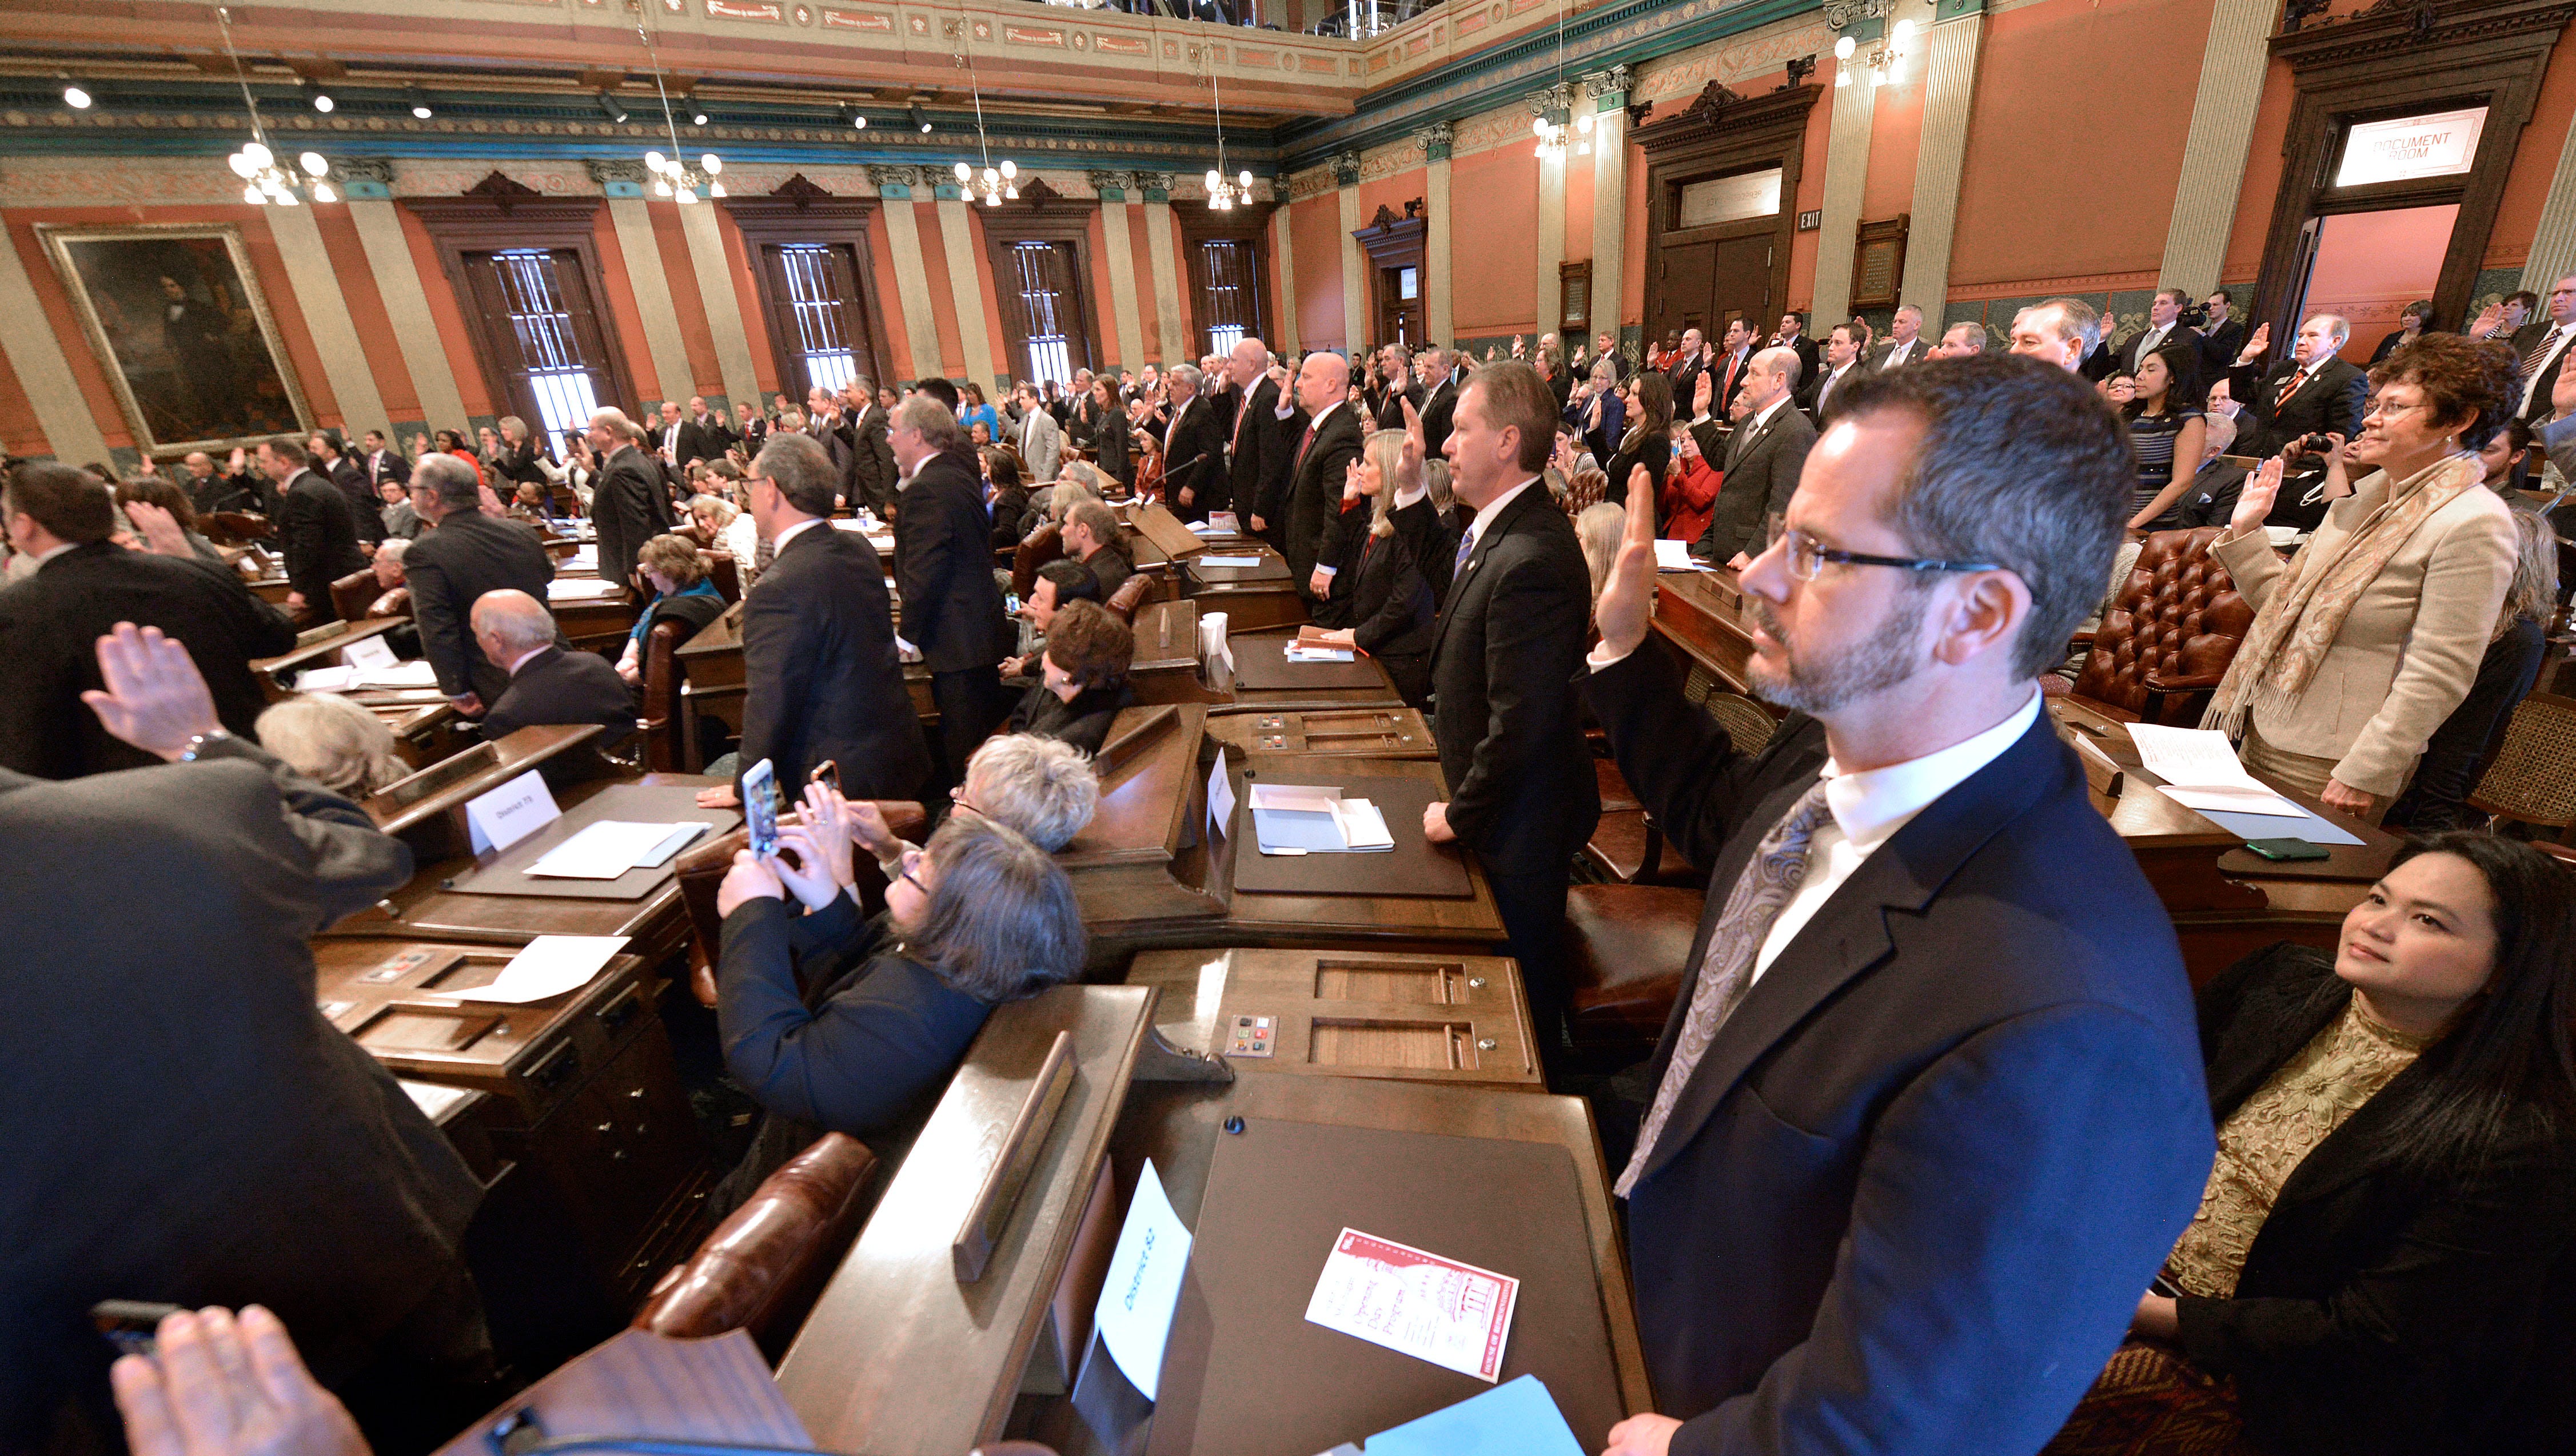 Rep. Todd Courser, R-Lapeer, takes his oath of office with his peers in the House of Representatives on the Michigan Legislature's first day of the new session, Wednesday, Jan. 14, 2015, in Lansing.  Seated behind Rep. Courser is his wife, Fon Courser.